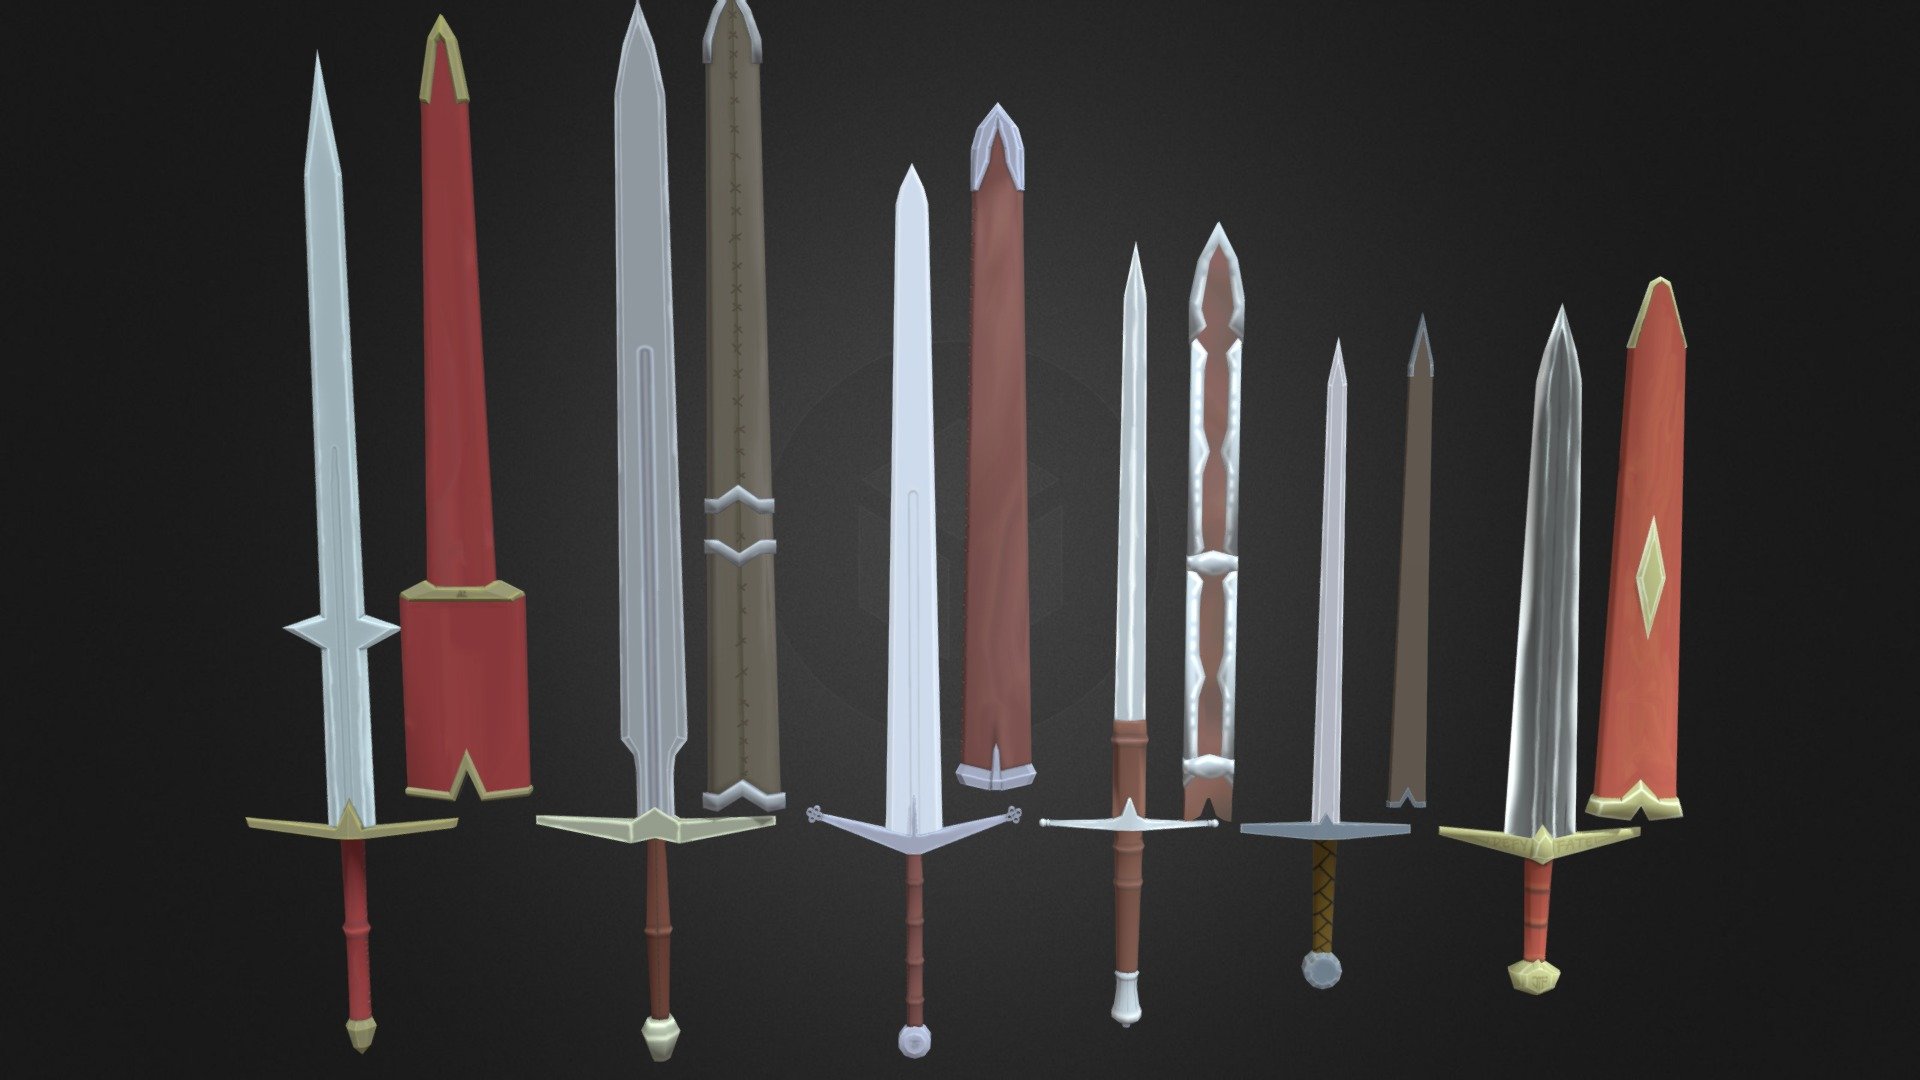 a collection of 6 swords + scabbards.
they are relatively low poly and each sword+scabbard are combined meshes. They are rigged so that the swords can be drawn with animations.

there are 3 two handed swords and the rest are 1-2 handed. 

one sword is my 1st attempt at making a sword with blender, and is used by my DnD character, and another is based on a sword I own IRL 3d model